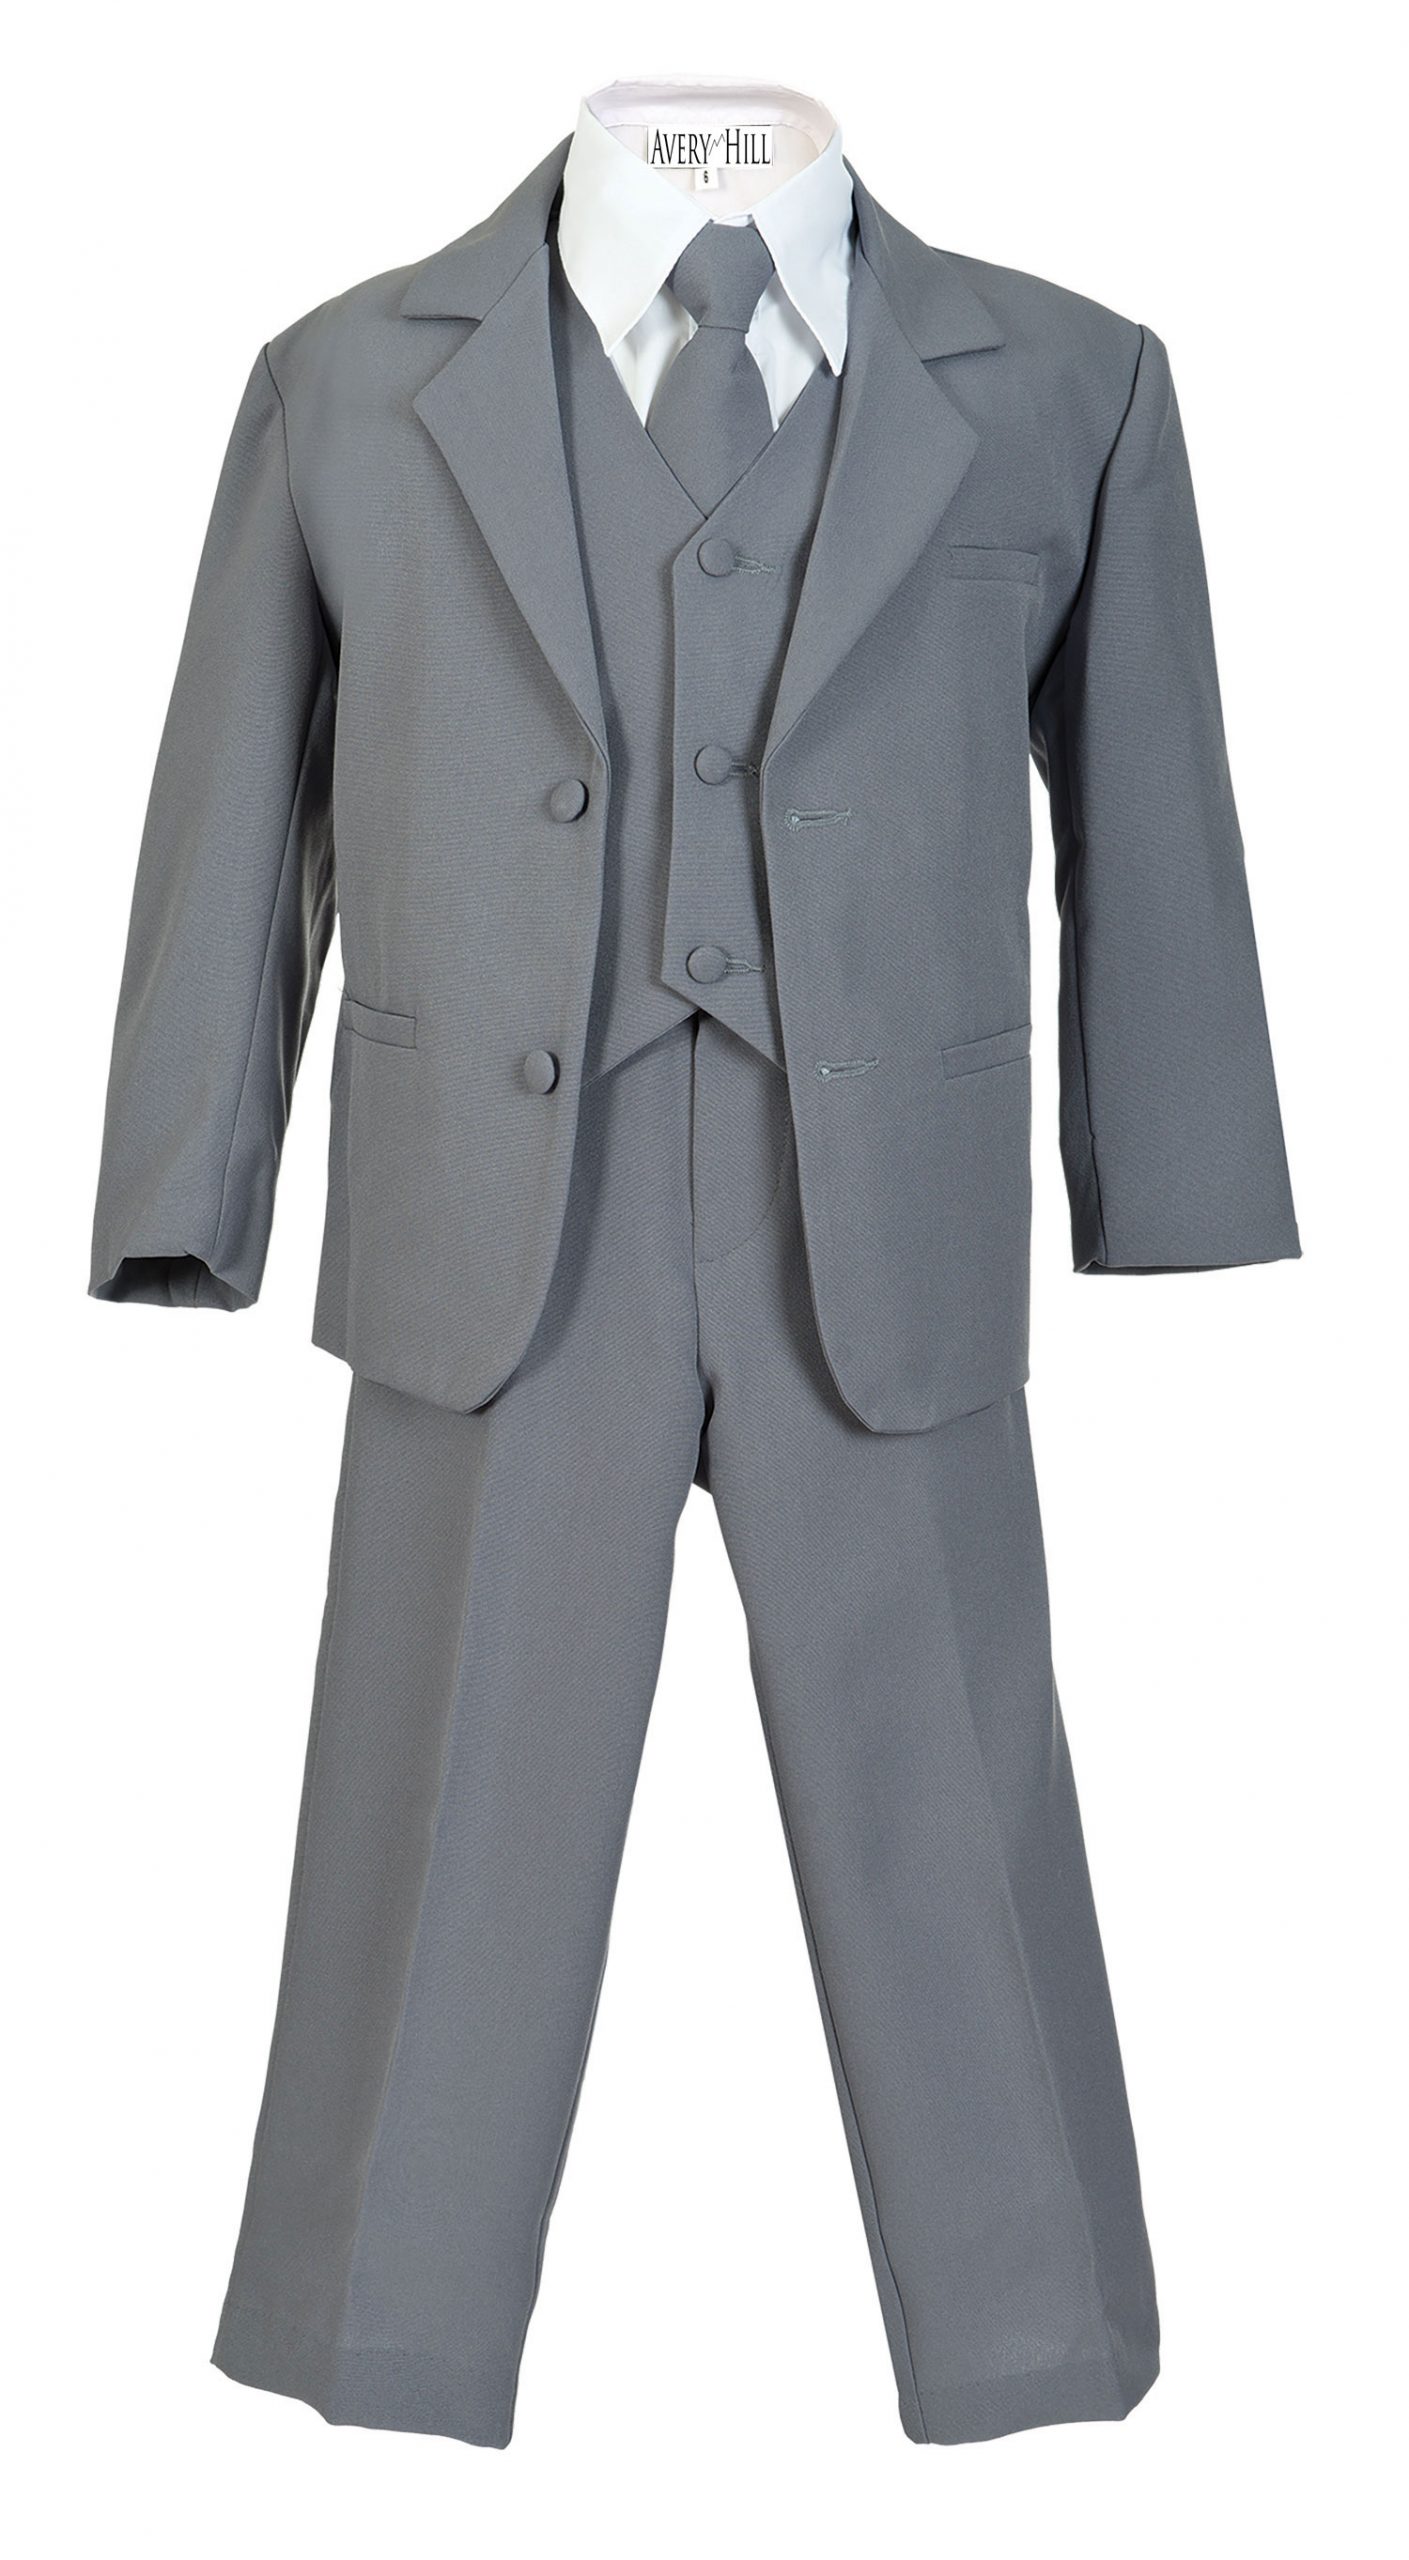 Avery Hill Boys Formal 5 Piece Suit with Shirt and Vest Slate Gray - 2T